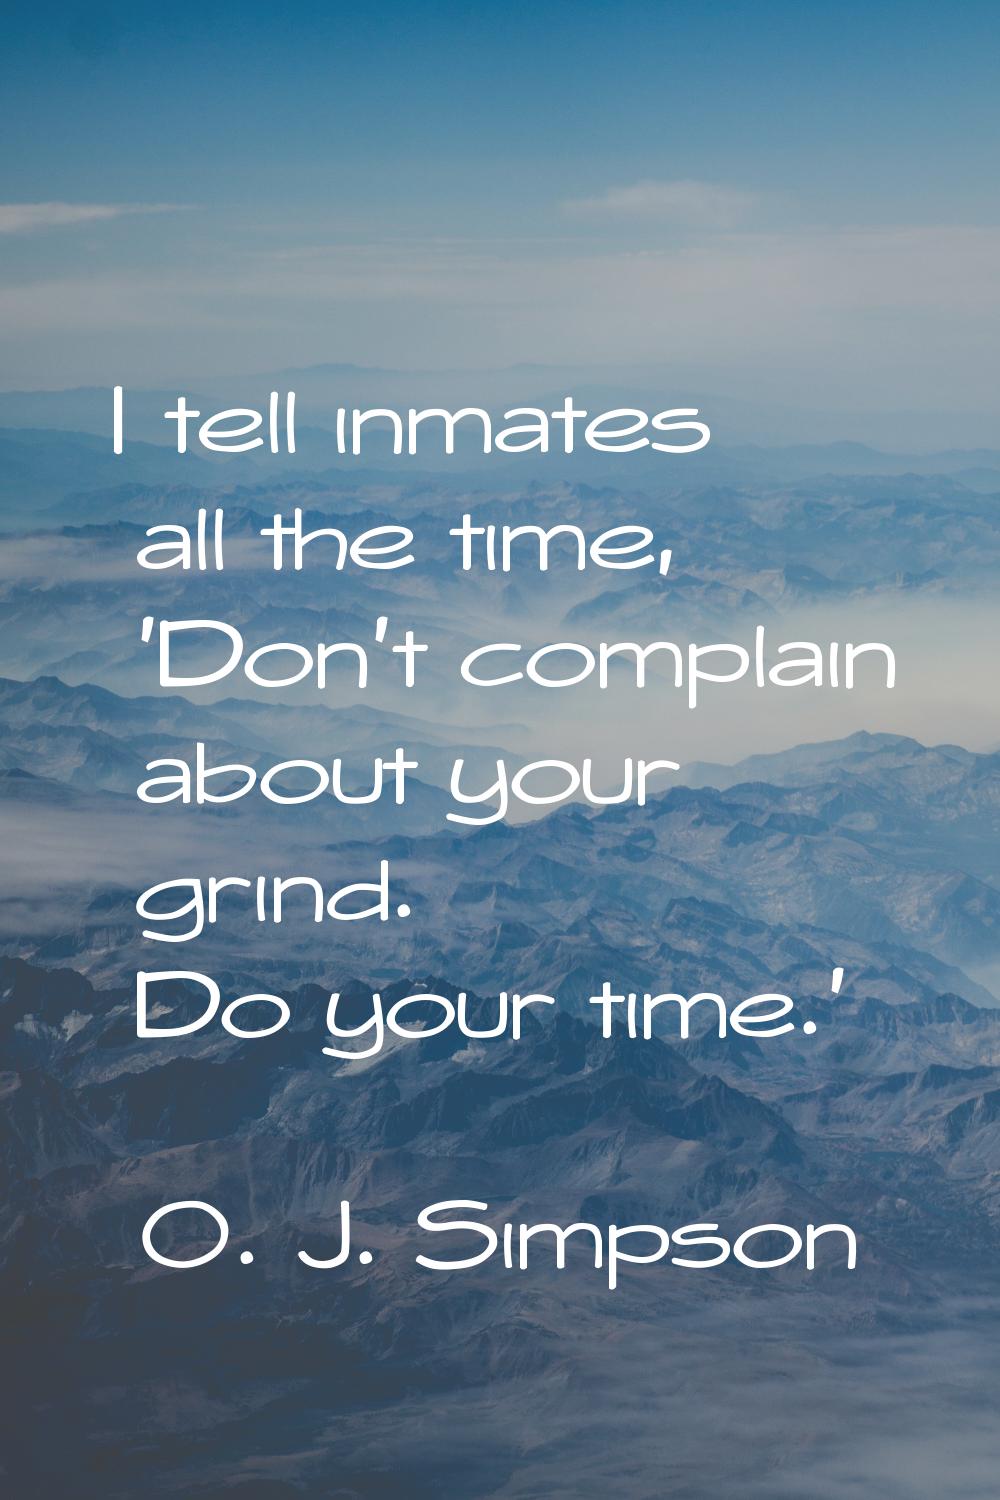 I tell inmates all the time, 'Don't complain about your grind. Do your time.'